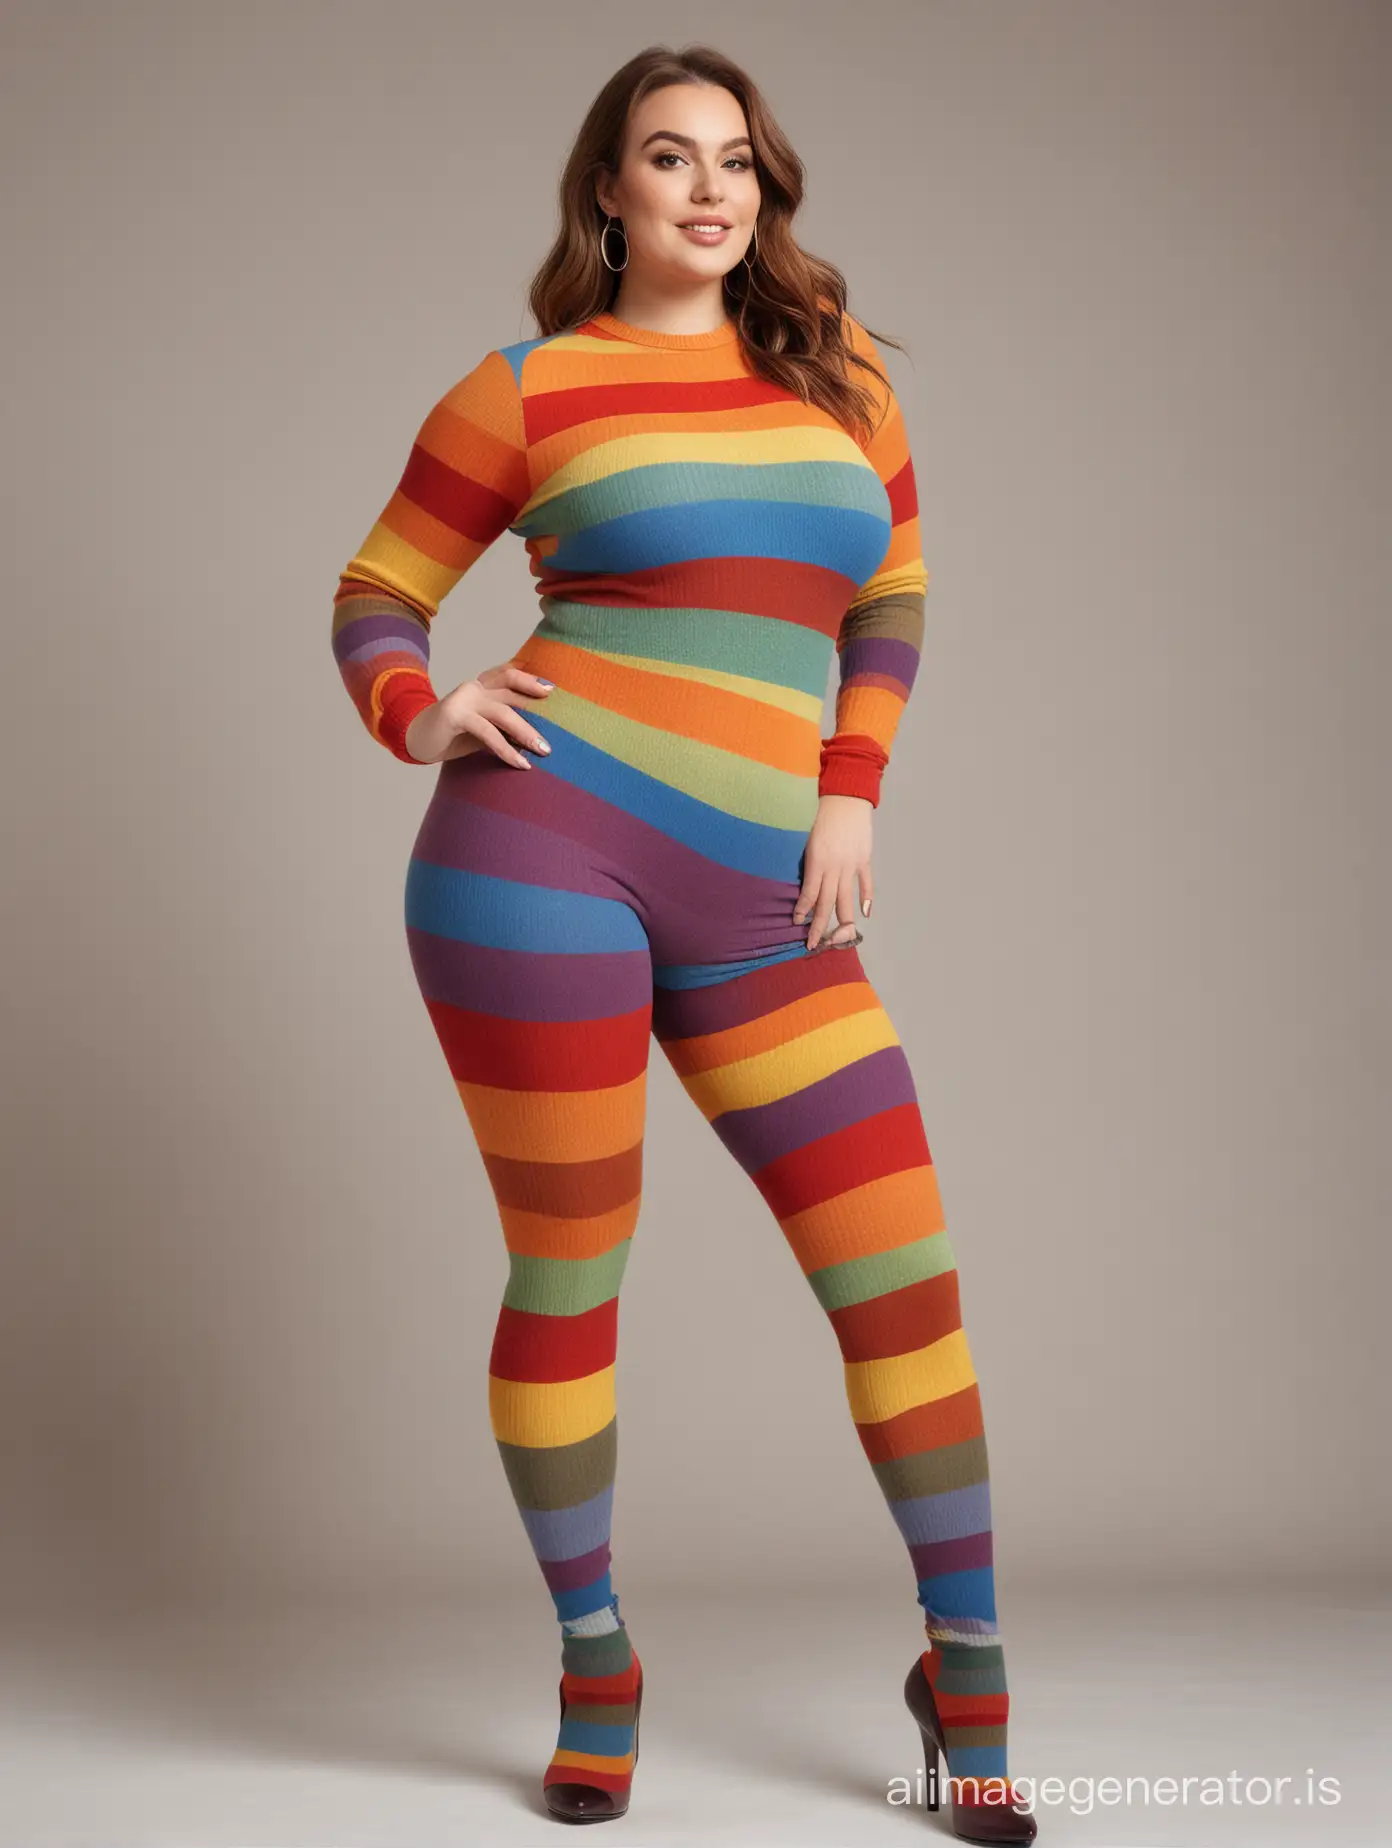 curvy woman ribbed chunky rainbow wool tights high heels full body with face